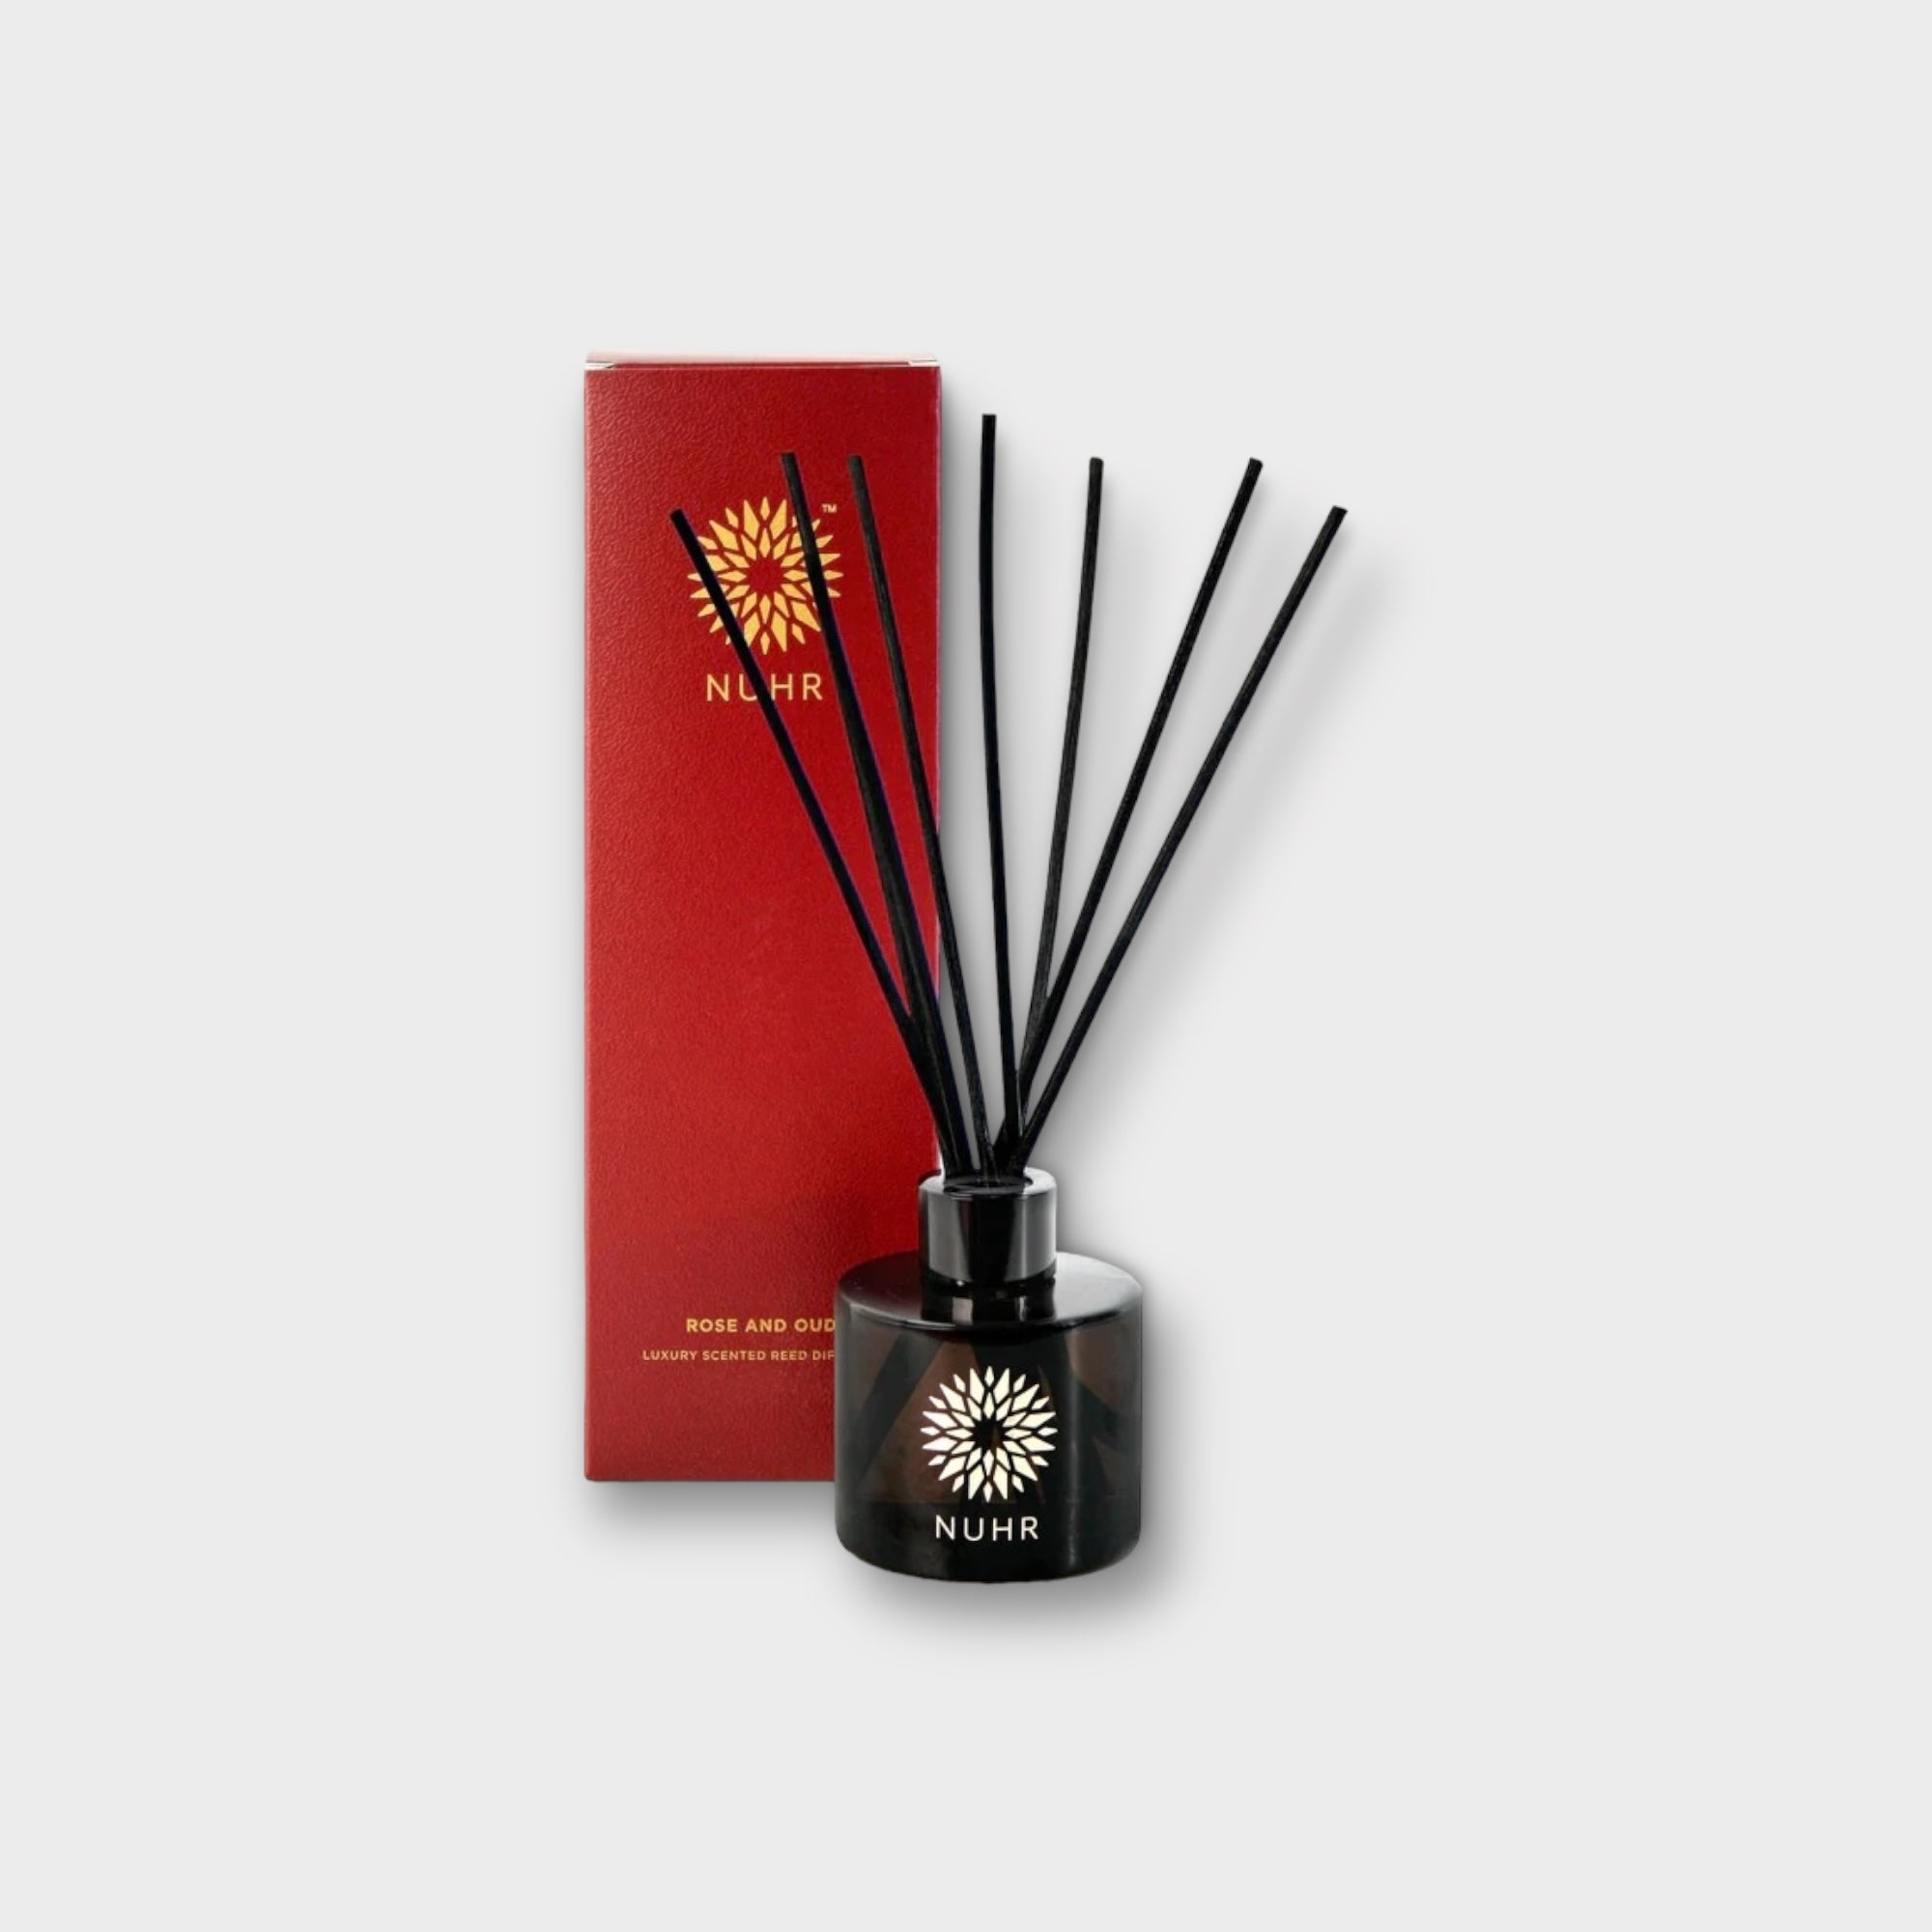 Rose & Oud Luxury Reed Diffuser - JLifestyle Store